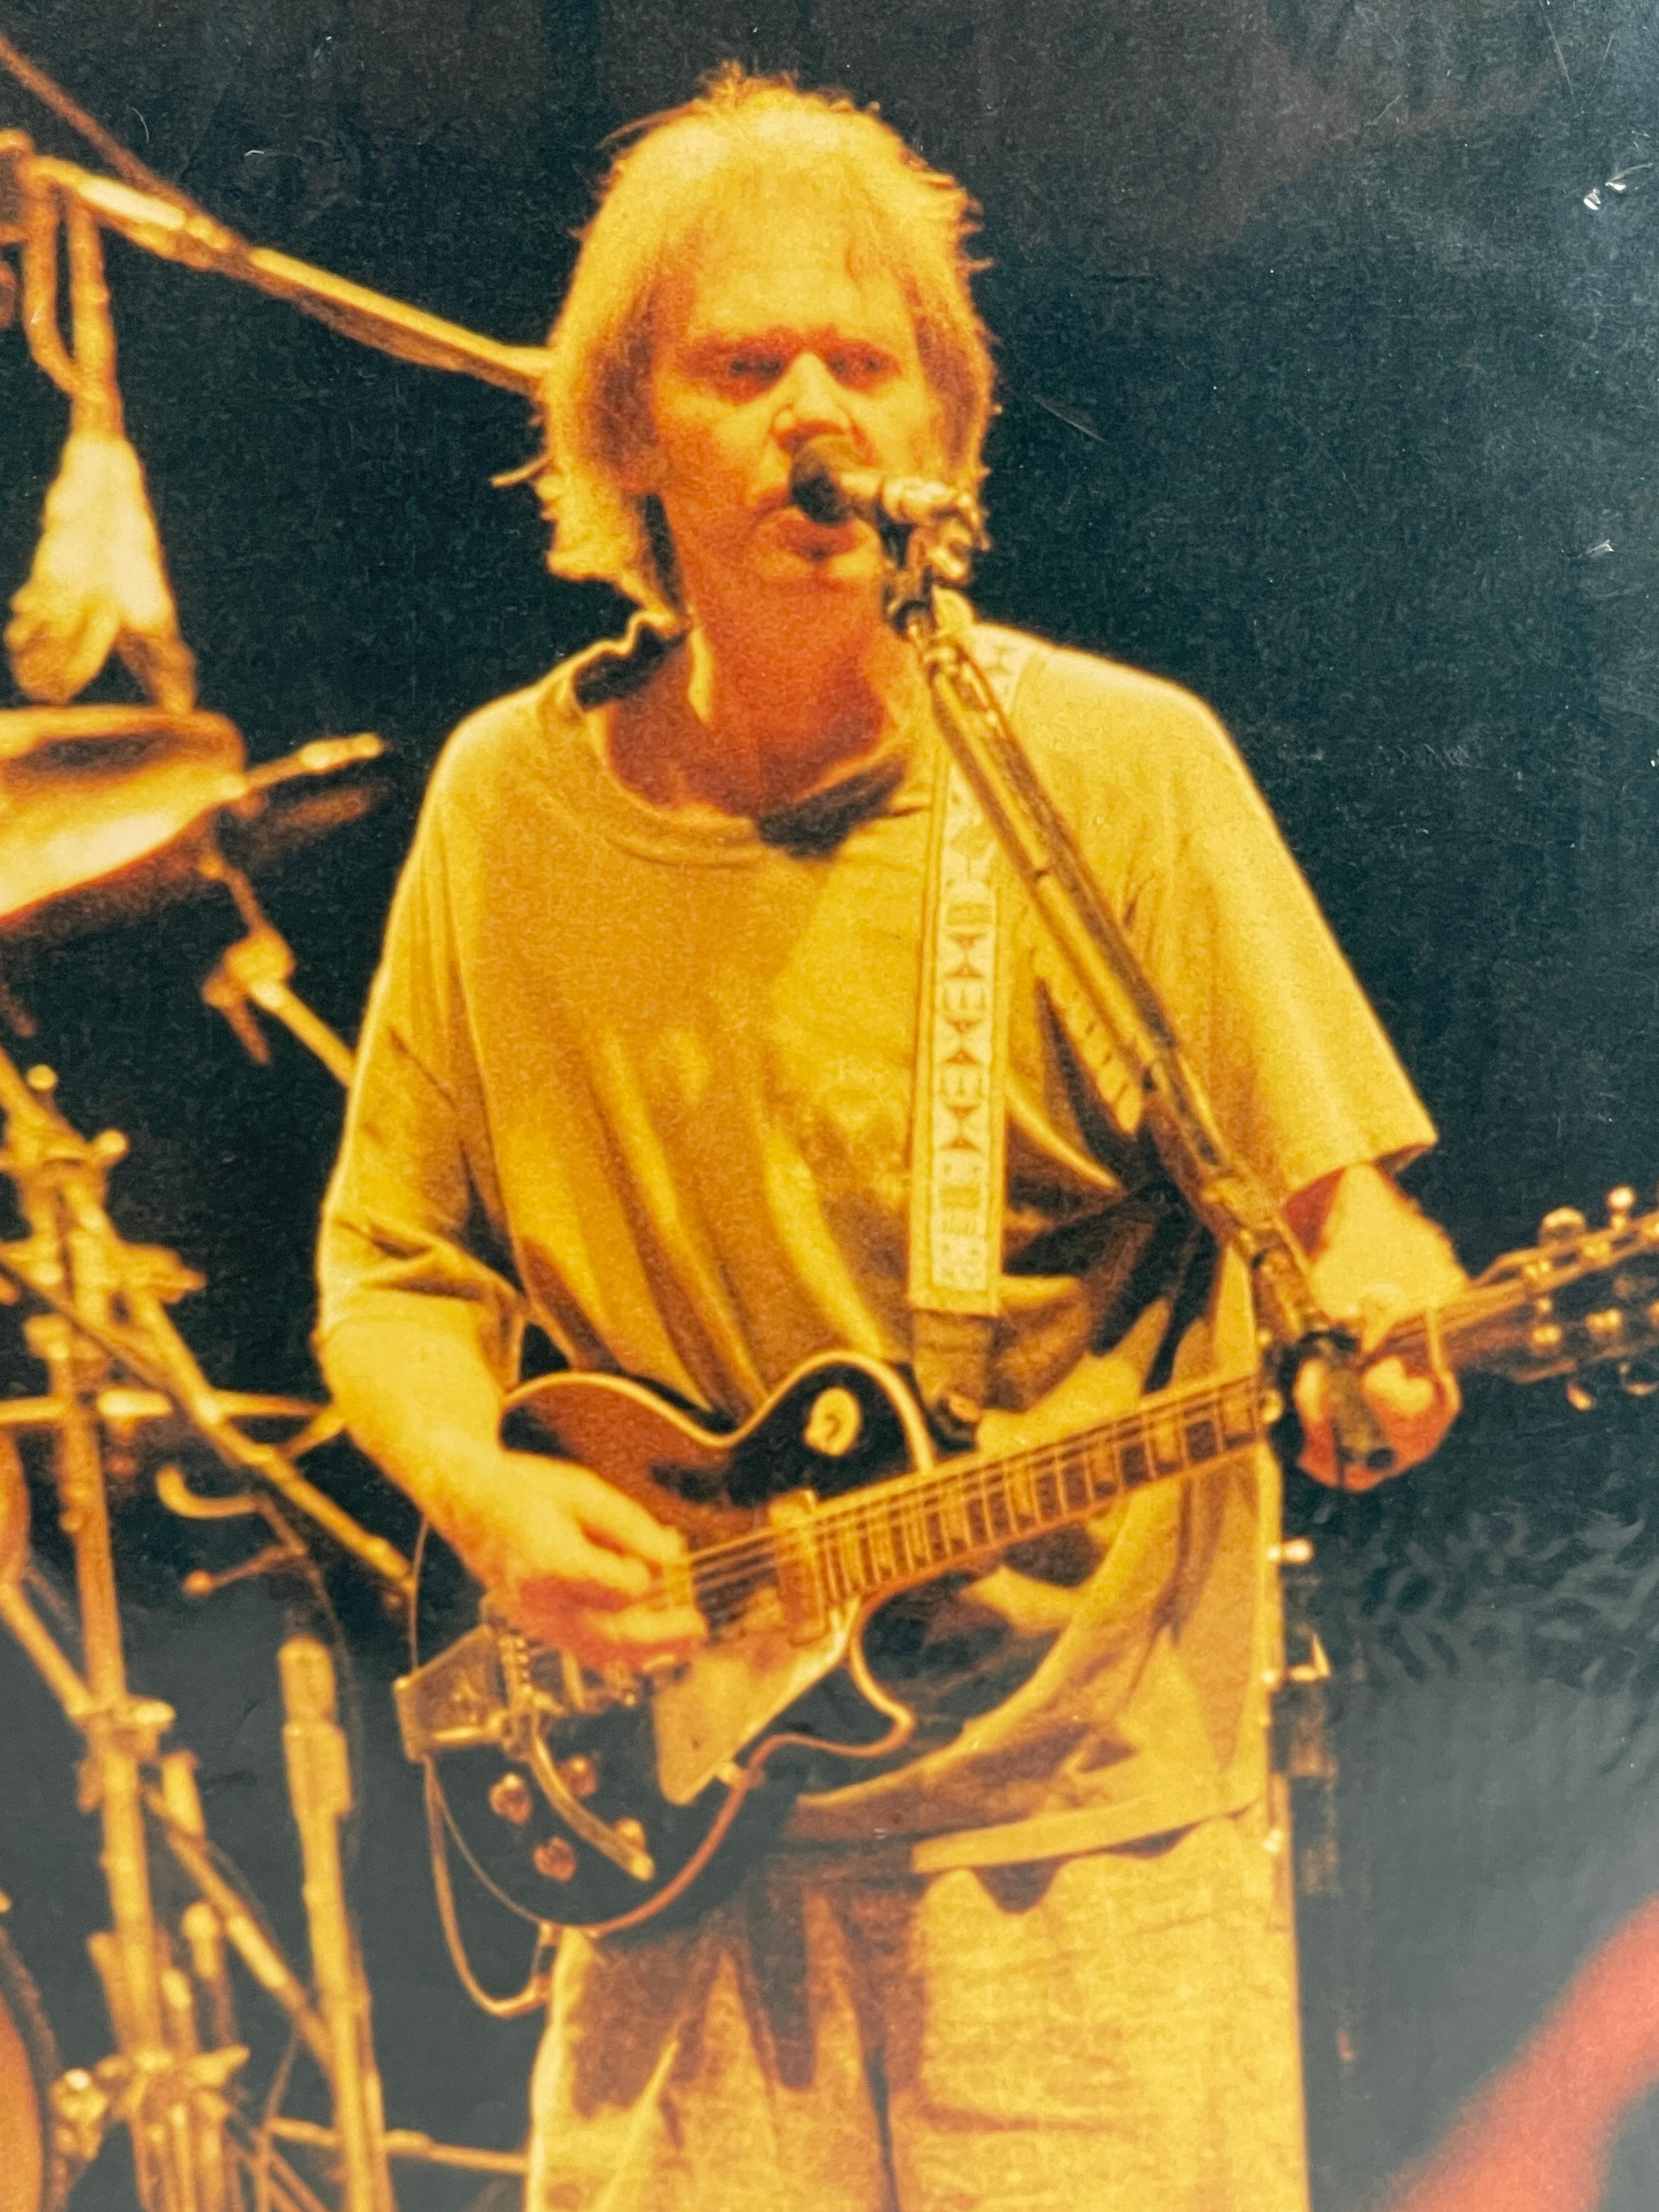 ORIGINAL COLOR PHOTOGRAPHY Neil Young  SIGNED